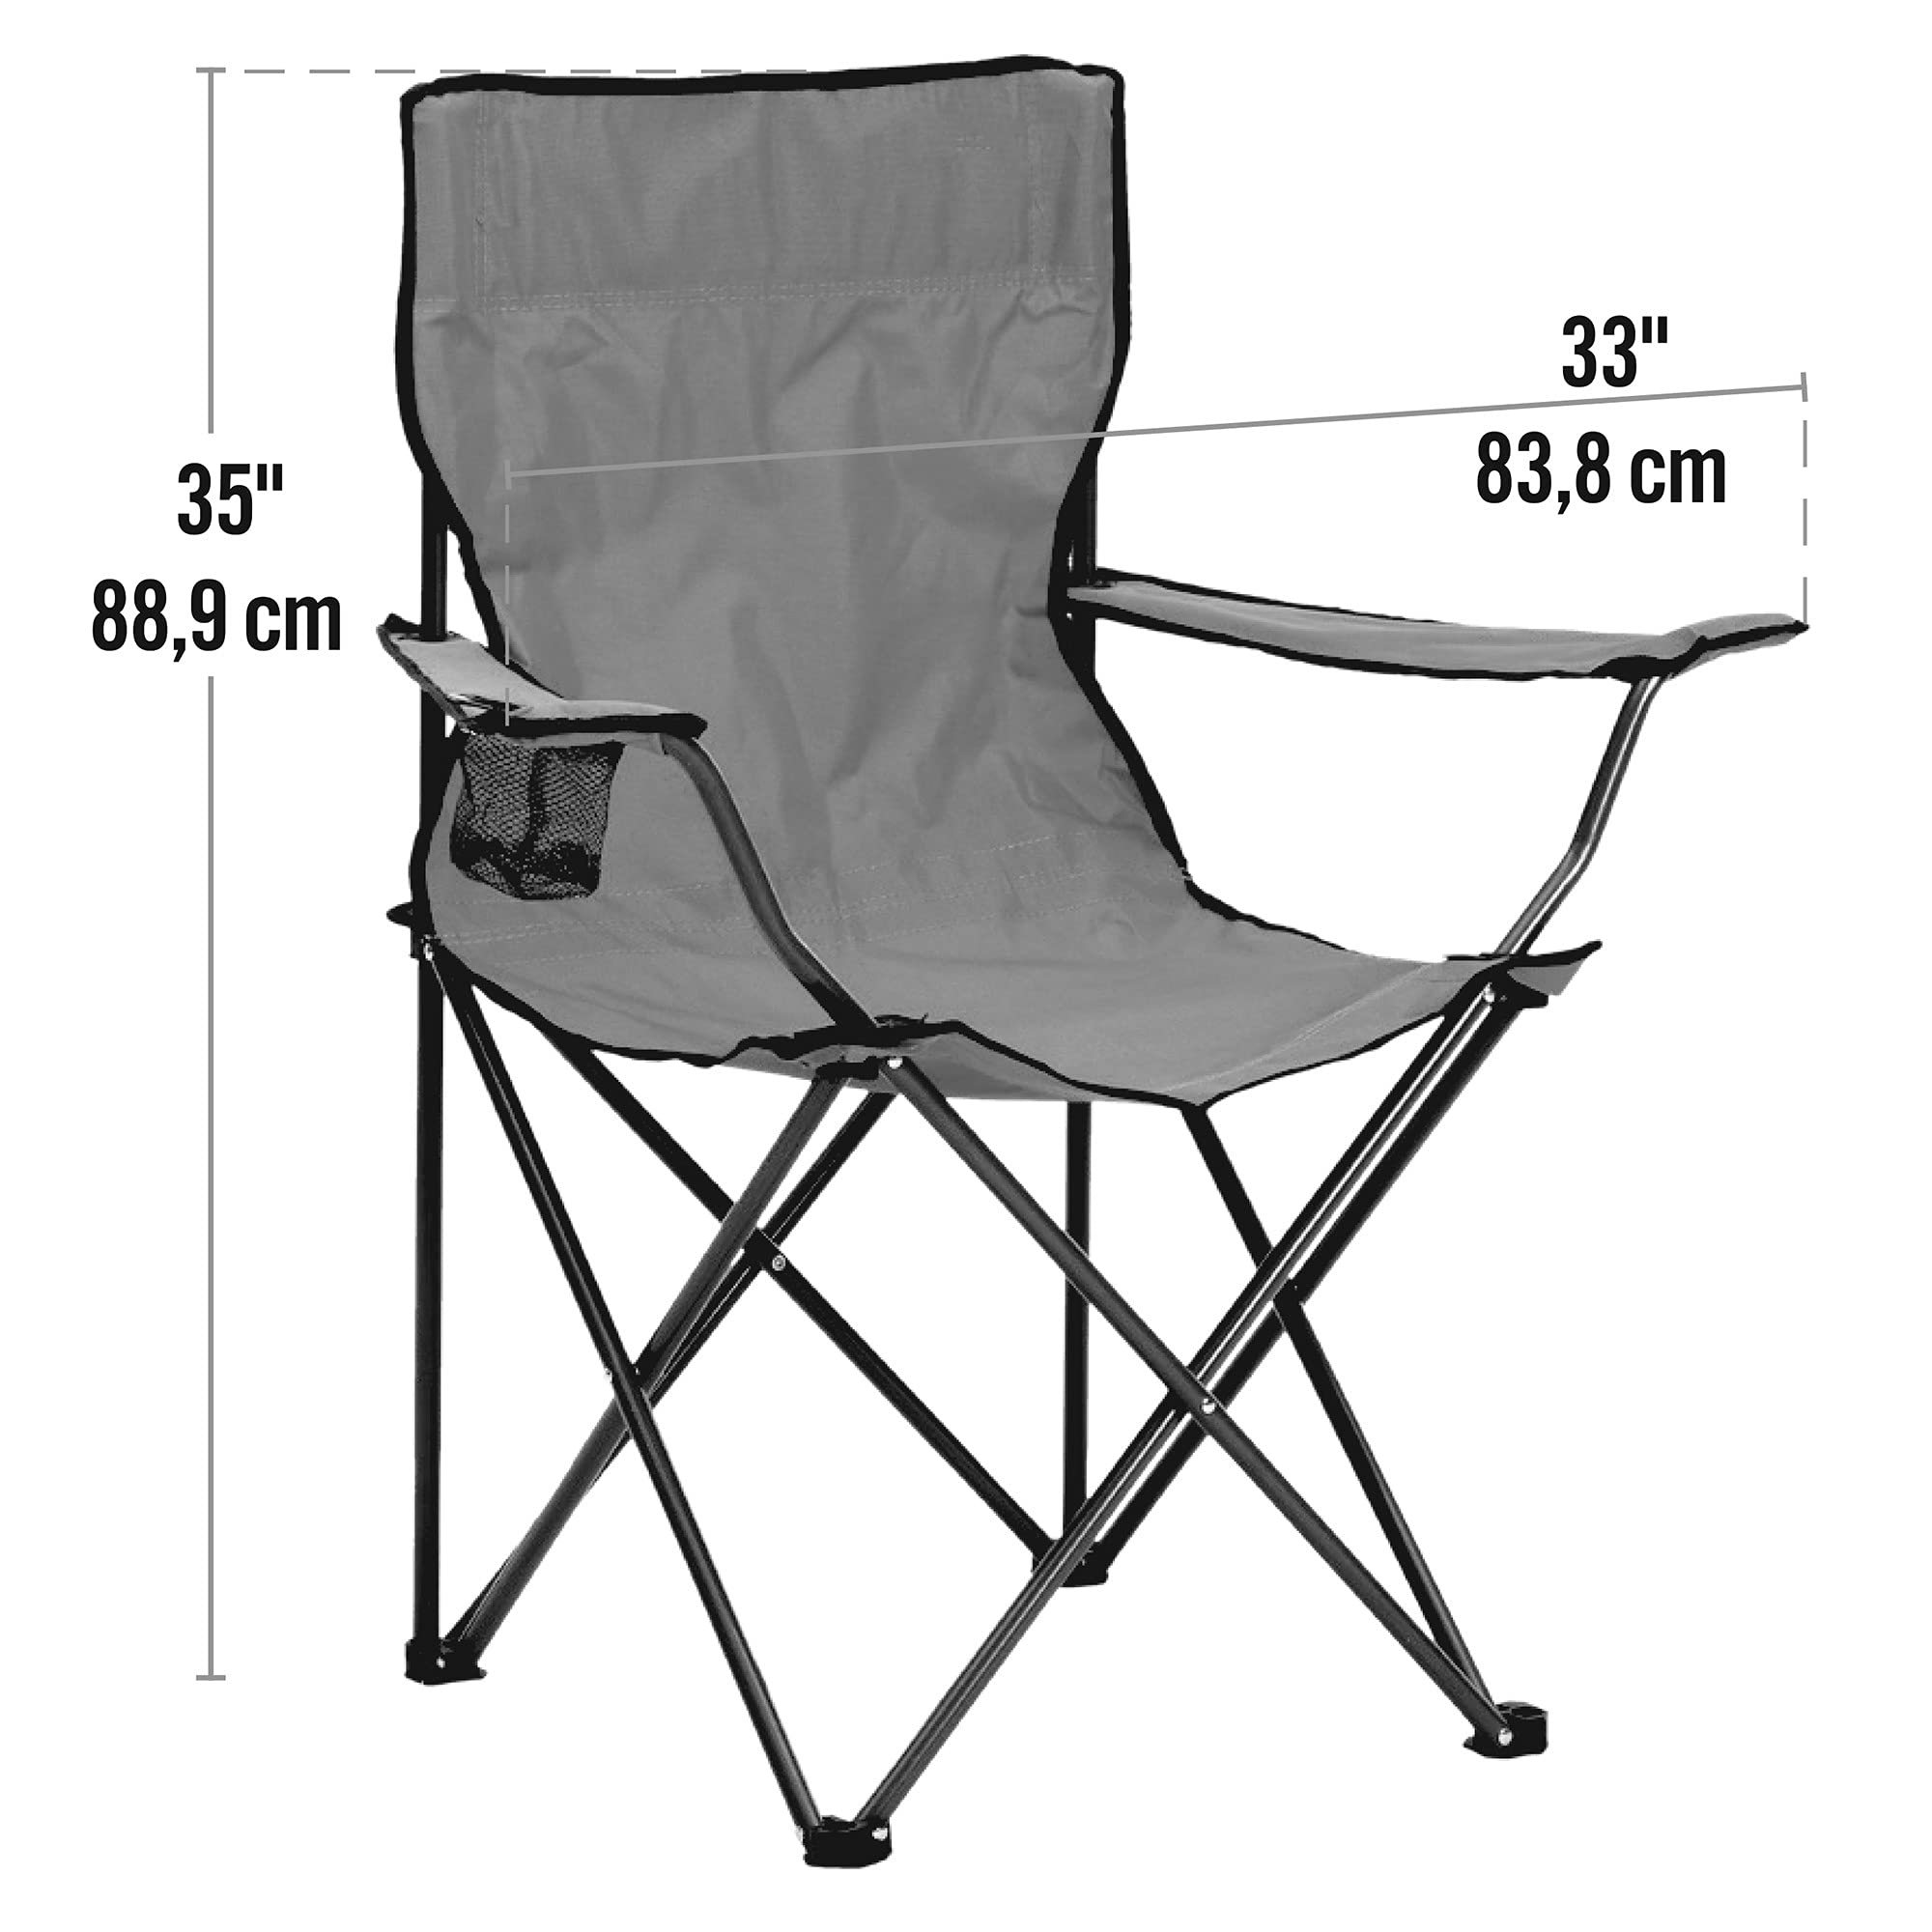 Quik Chair Portable Folding Chair with Arm Rest Cup Holder and Carrying and Storage Bag, Blue